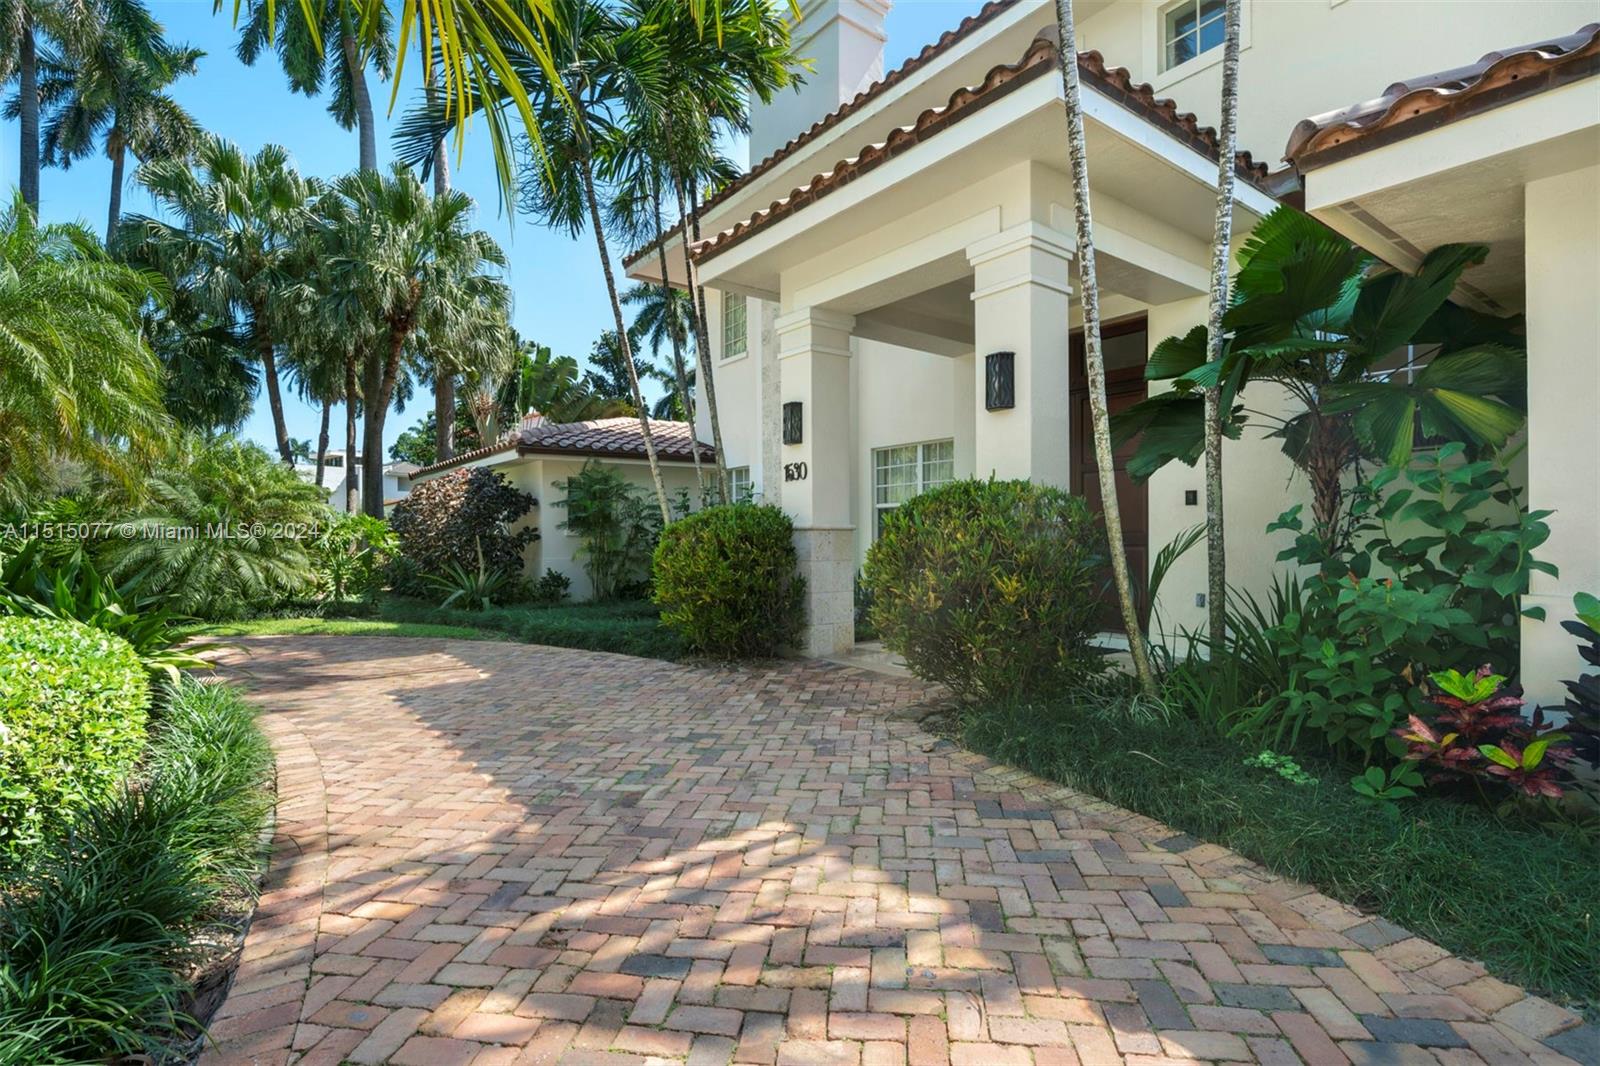 1530 W 27th St, Miami Beach, Florida 33140, 4 Bedrooms Bedrooms, ,4 BathroomsBathrooms,Residential,For Sale,1530 W 27th St,A11515077